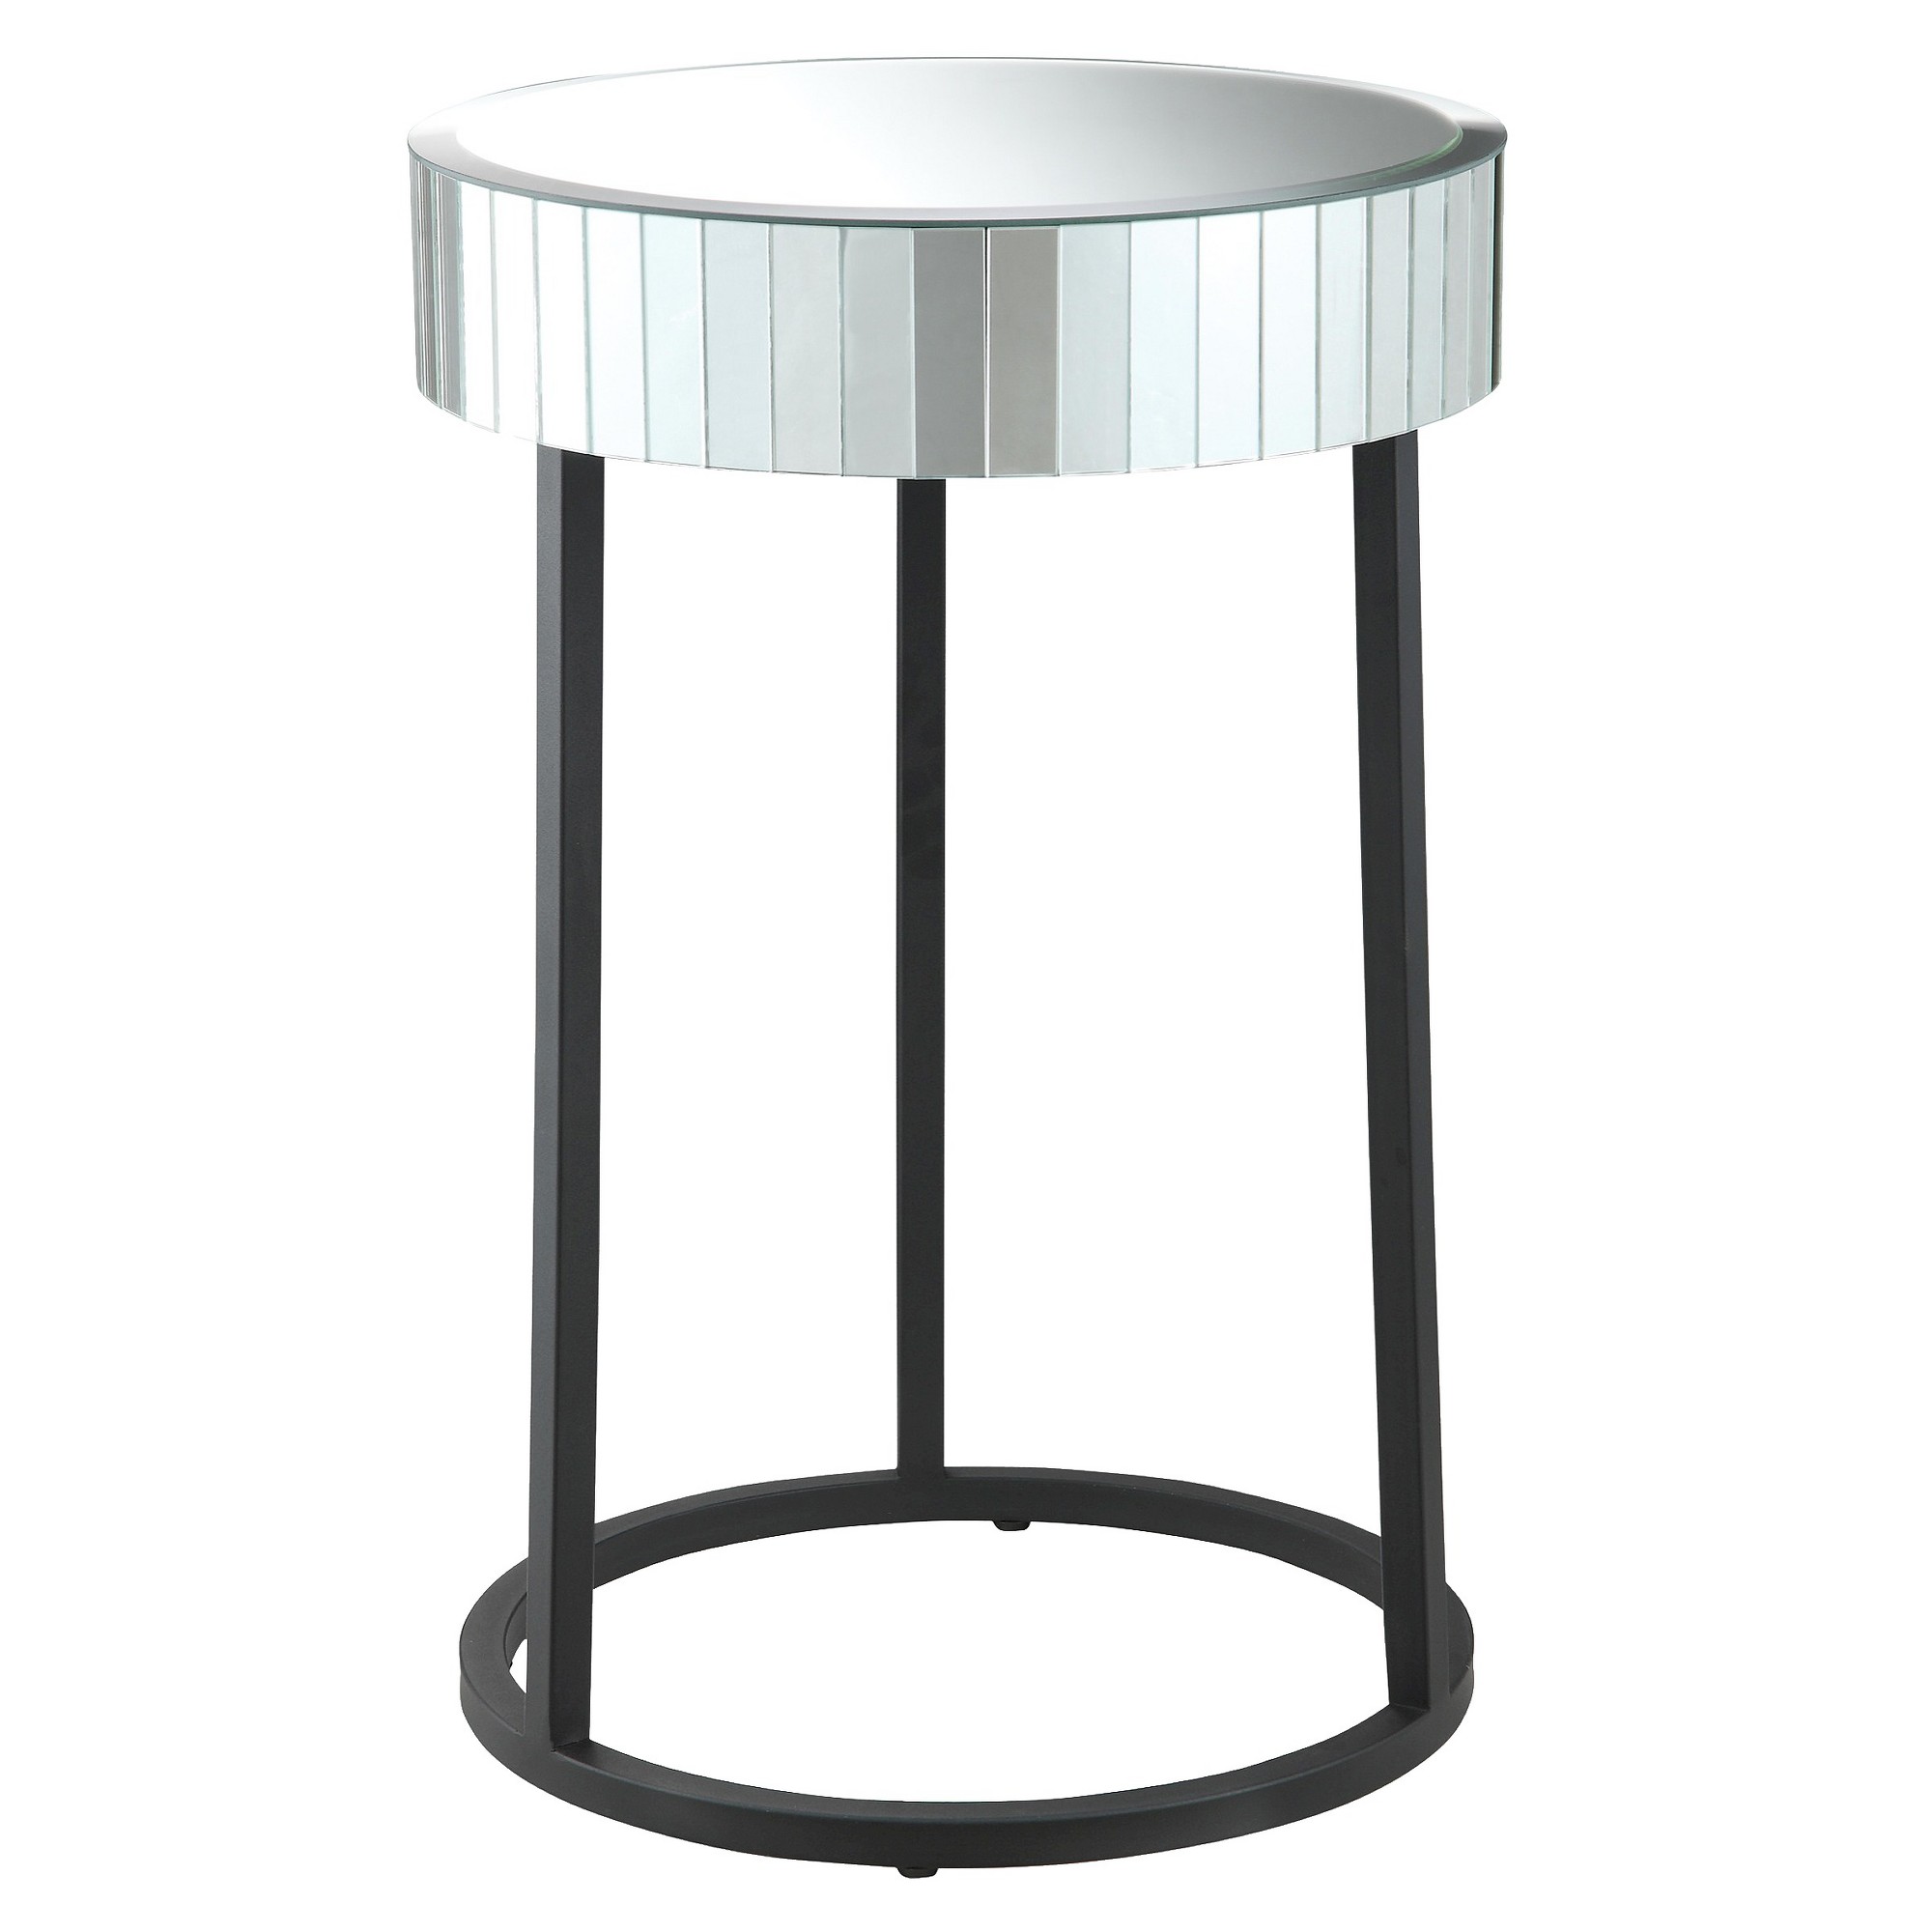 krystal round mirror accent table with metal legs office star mirrored black foldable coffee vanity home goods outdoor lights battery telephone white corner antique lamps target